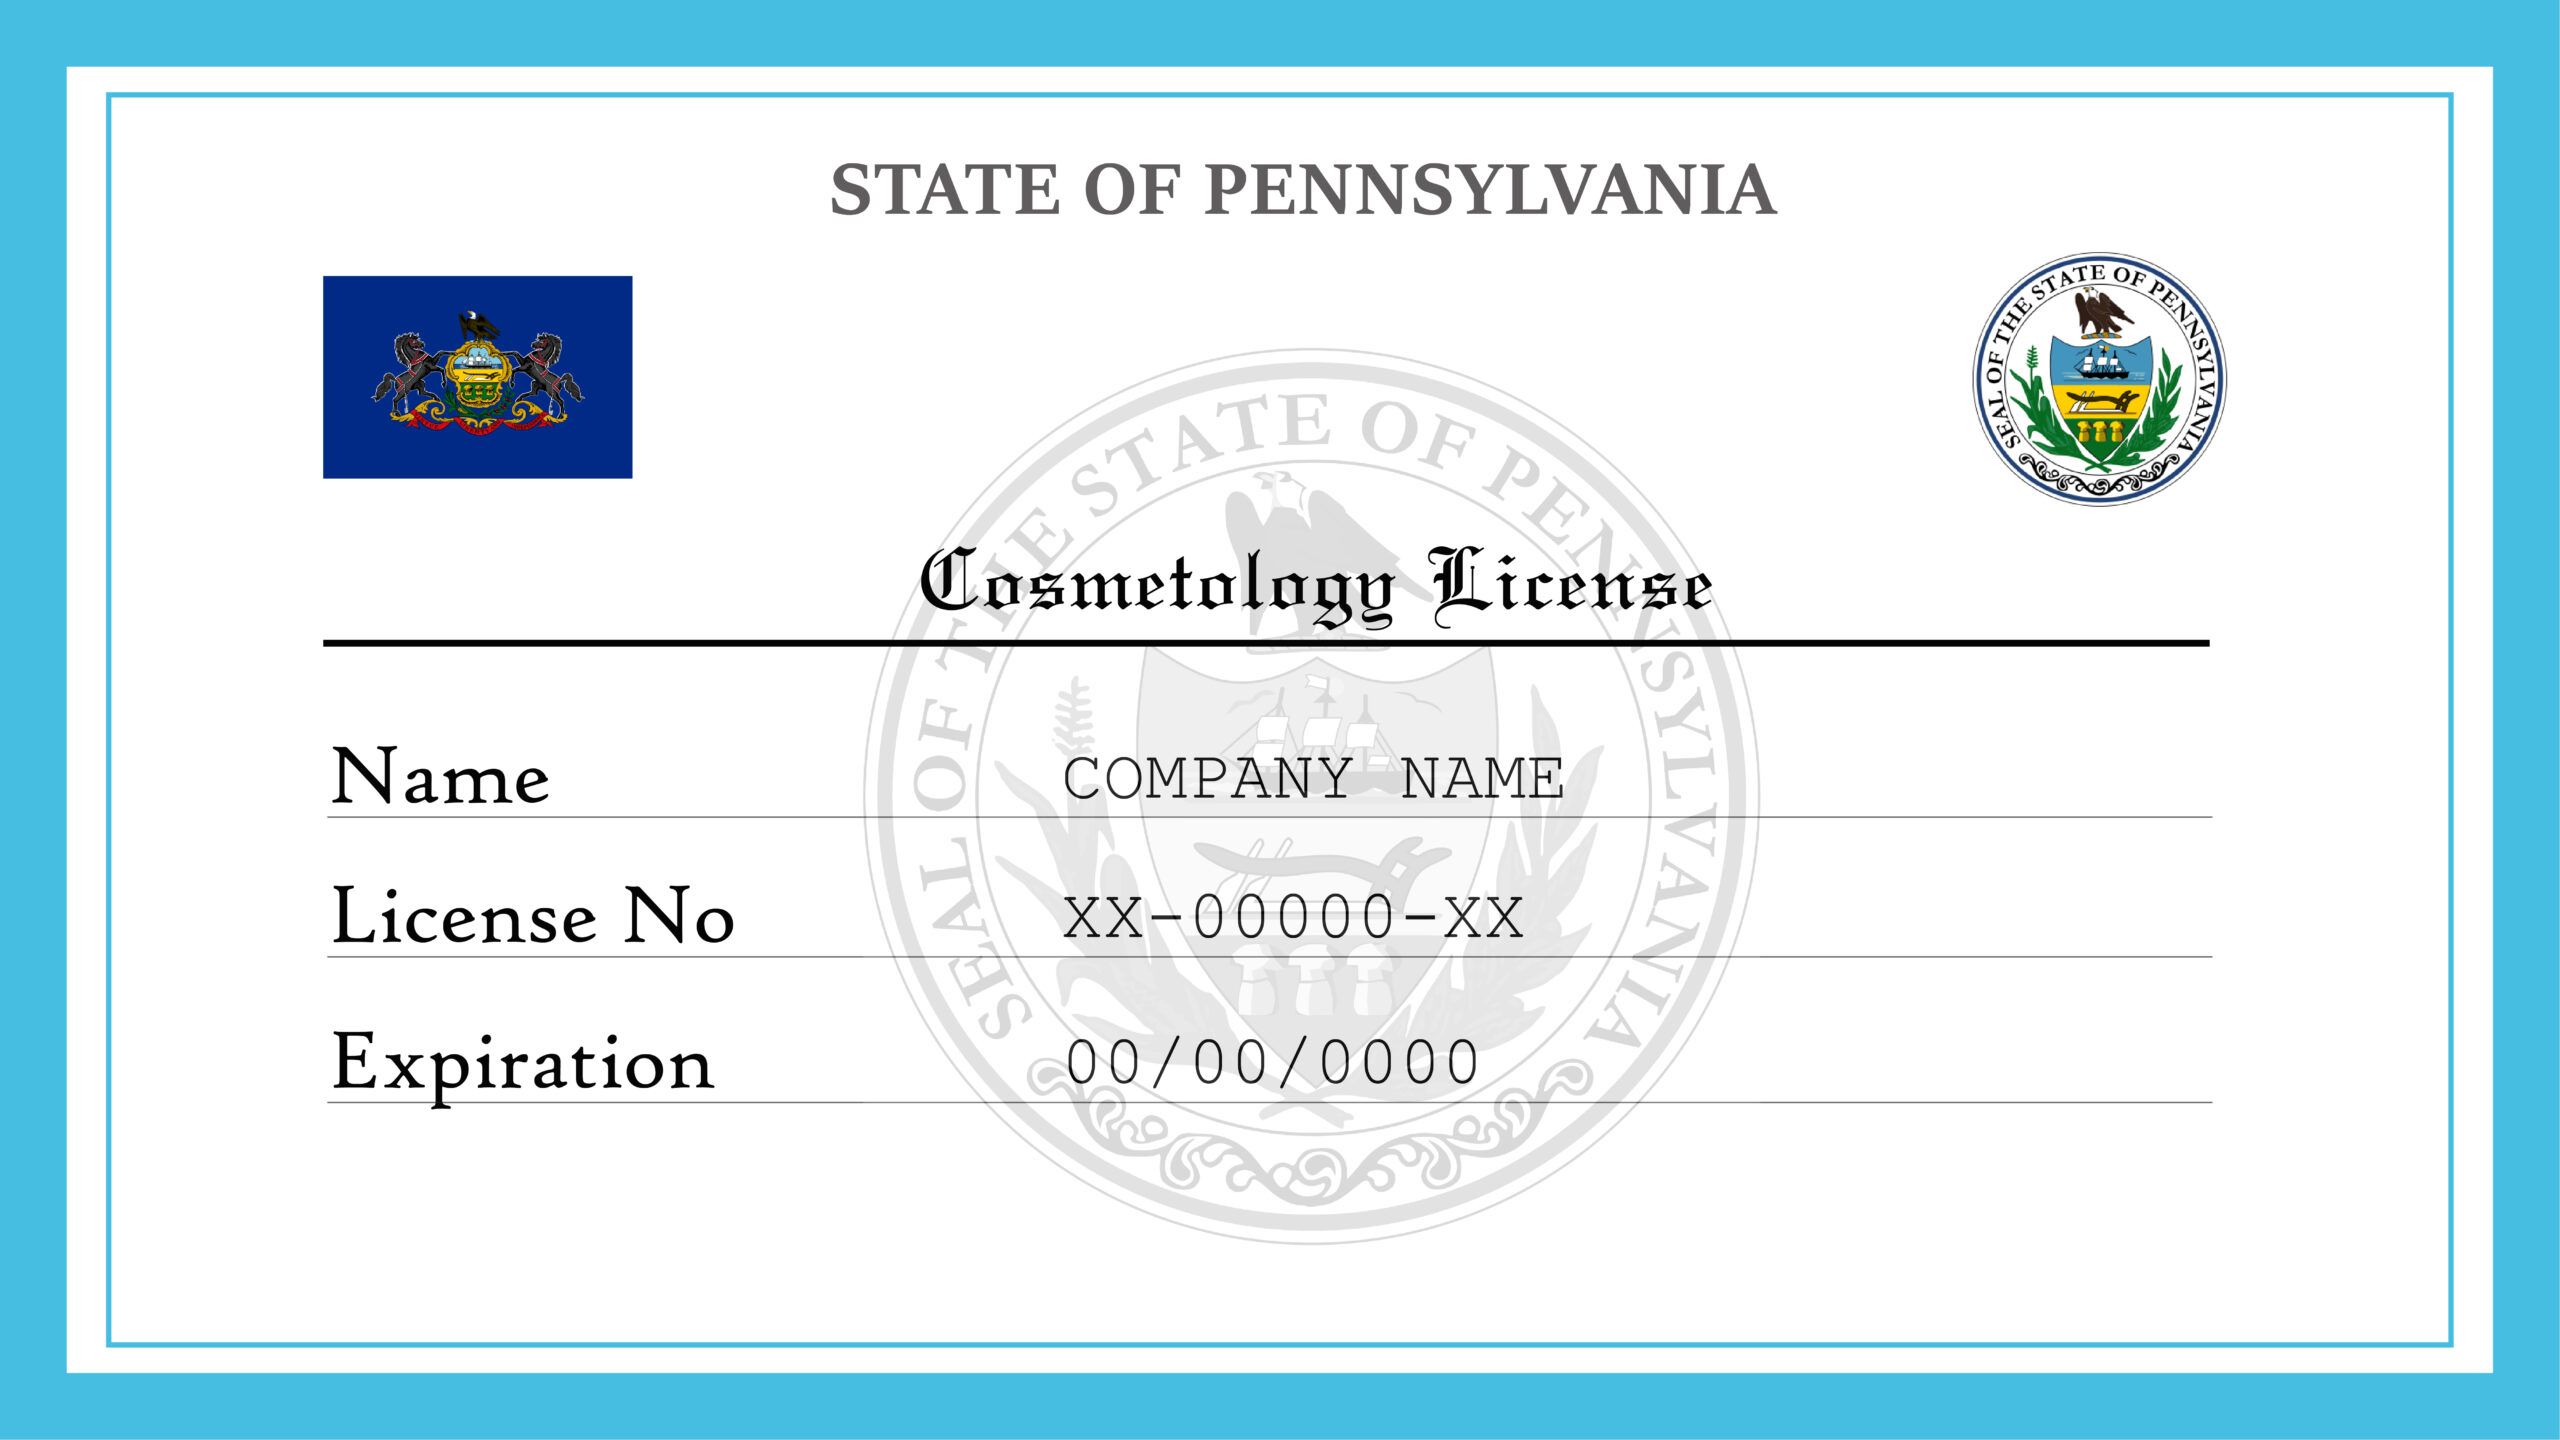 Pennsylvania Cosmetology License Scaled 9911a630b4 